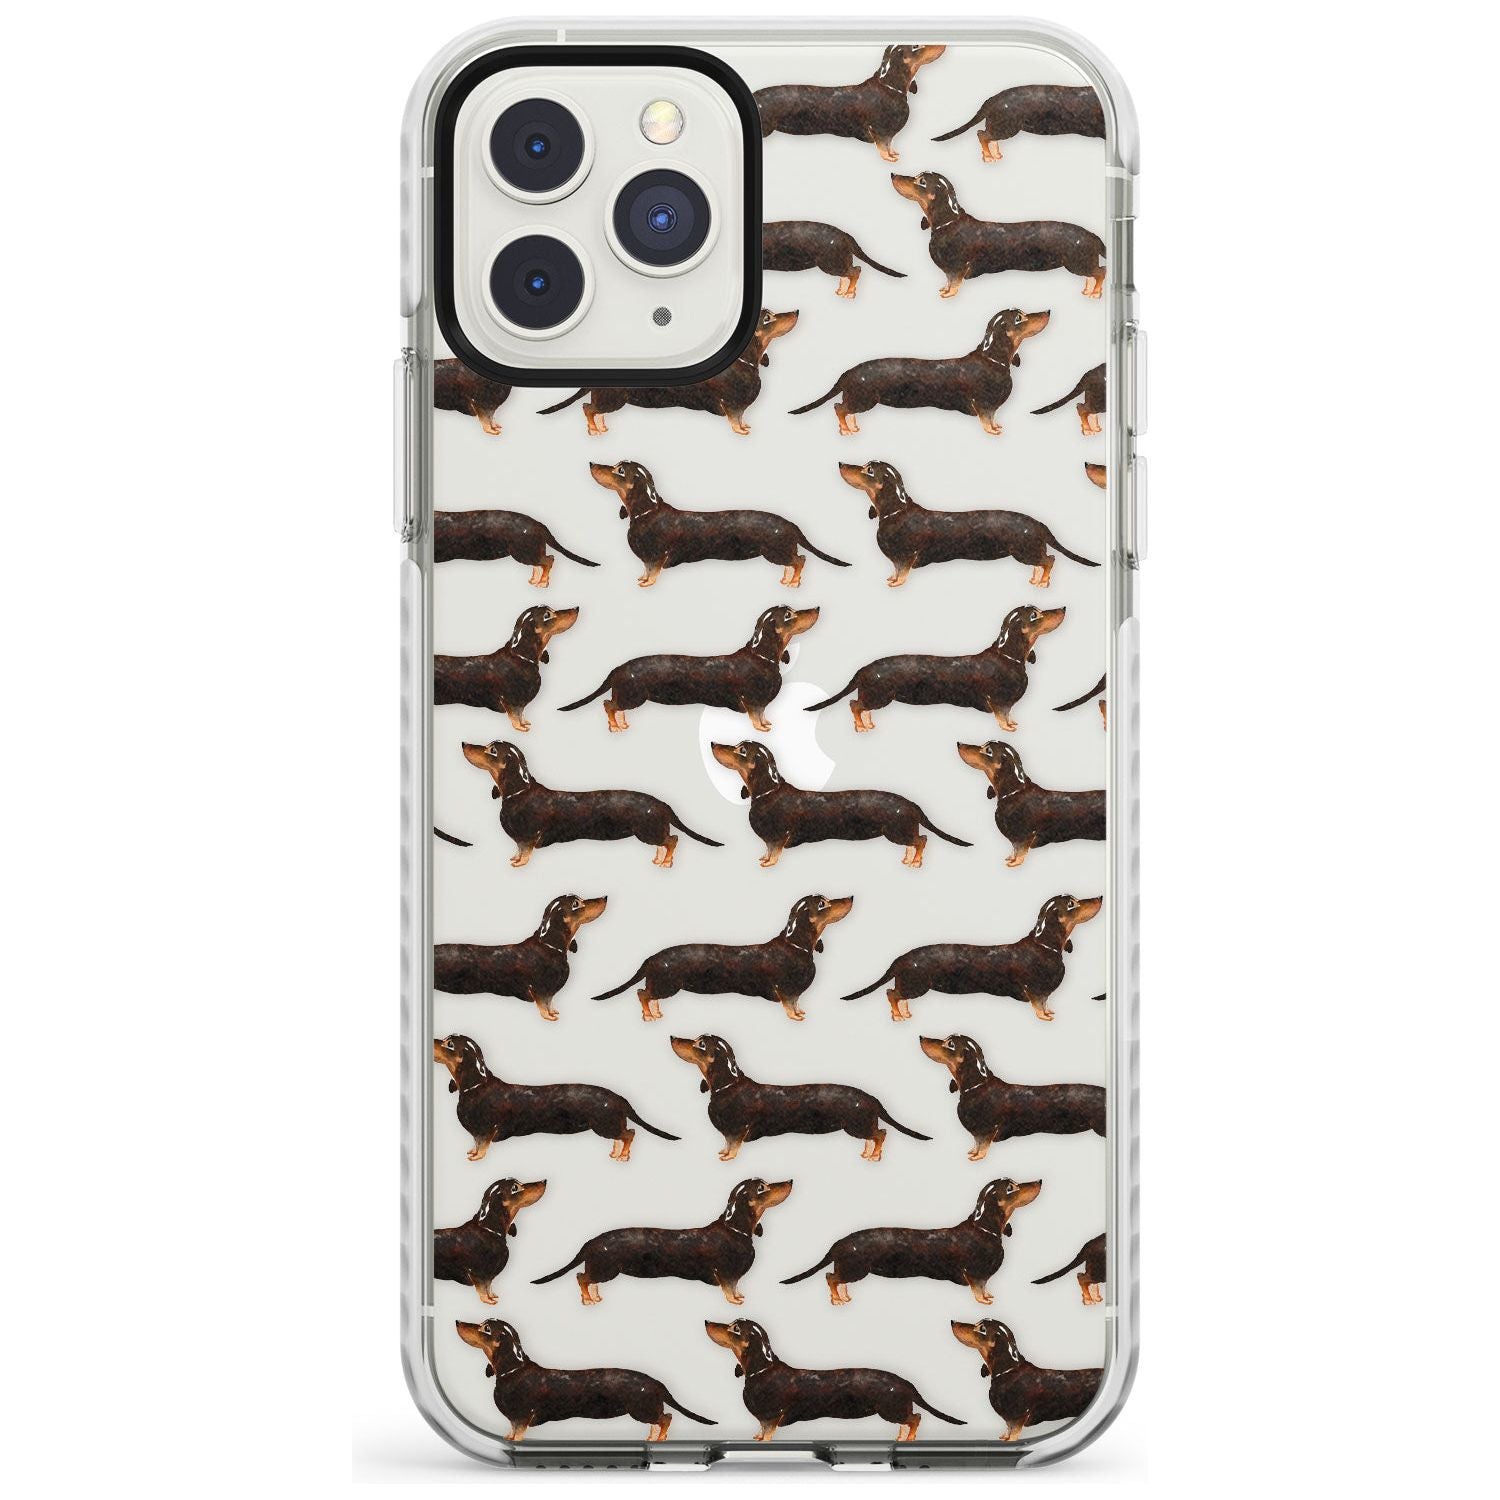 Dachshund (Black & Tan) Watercolour Dog Pattern Impact Phone Case for iPhone 11 Pro Max